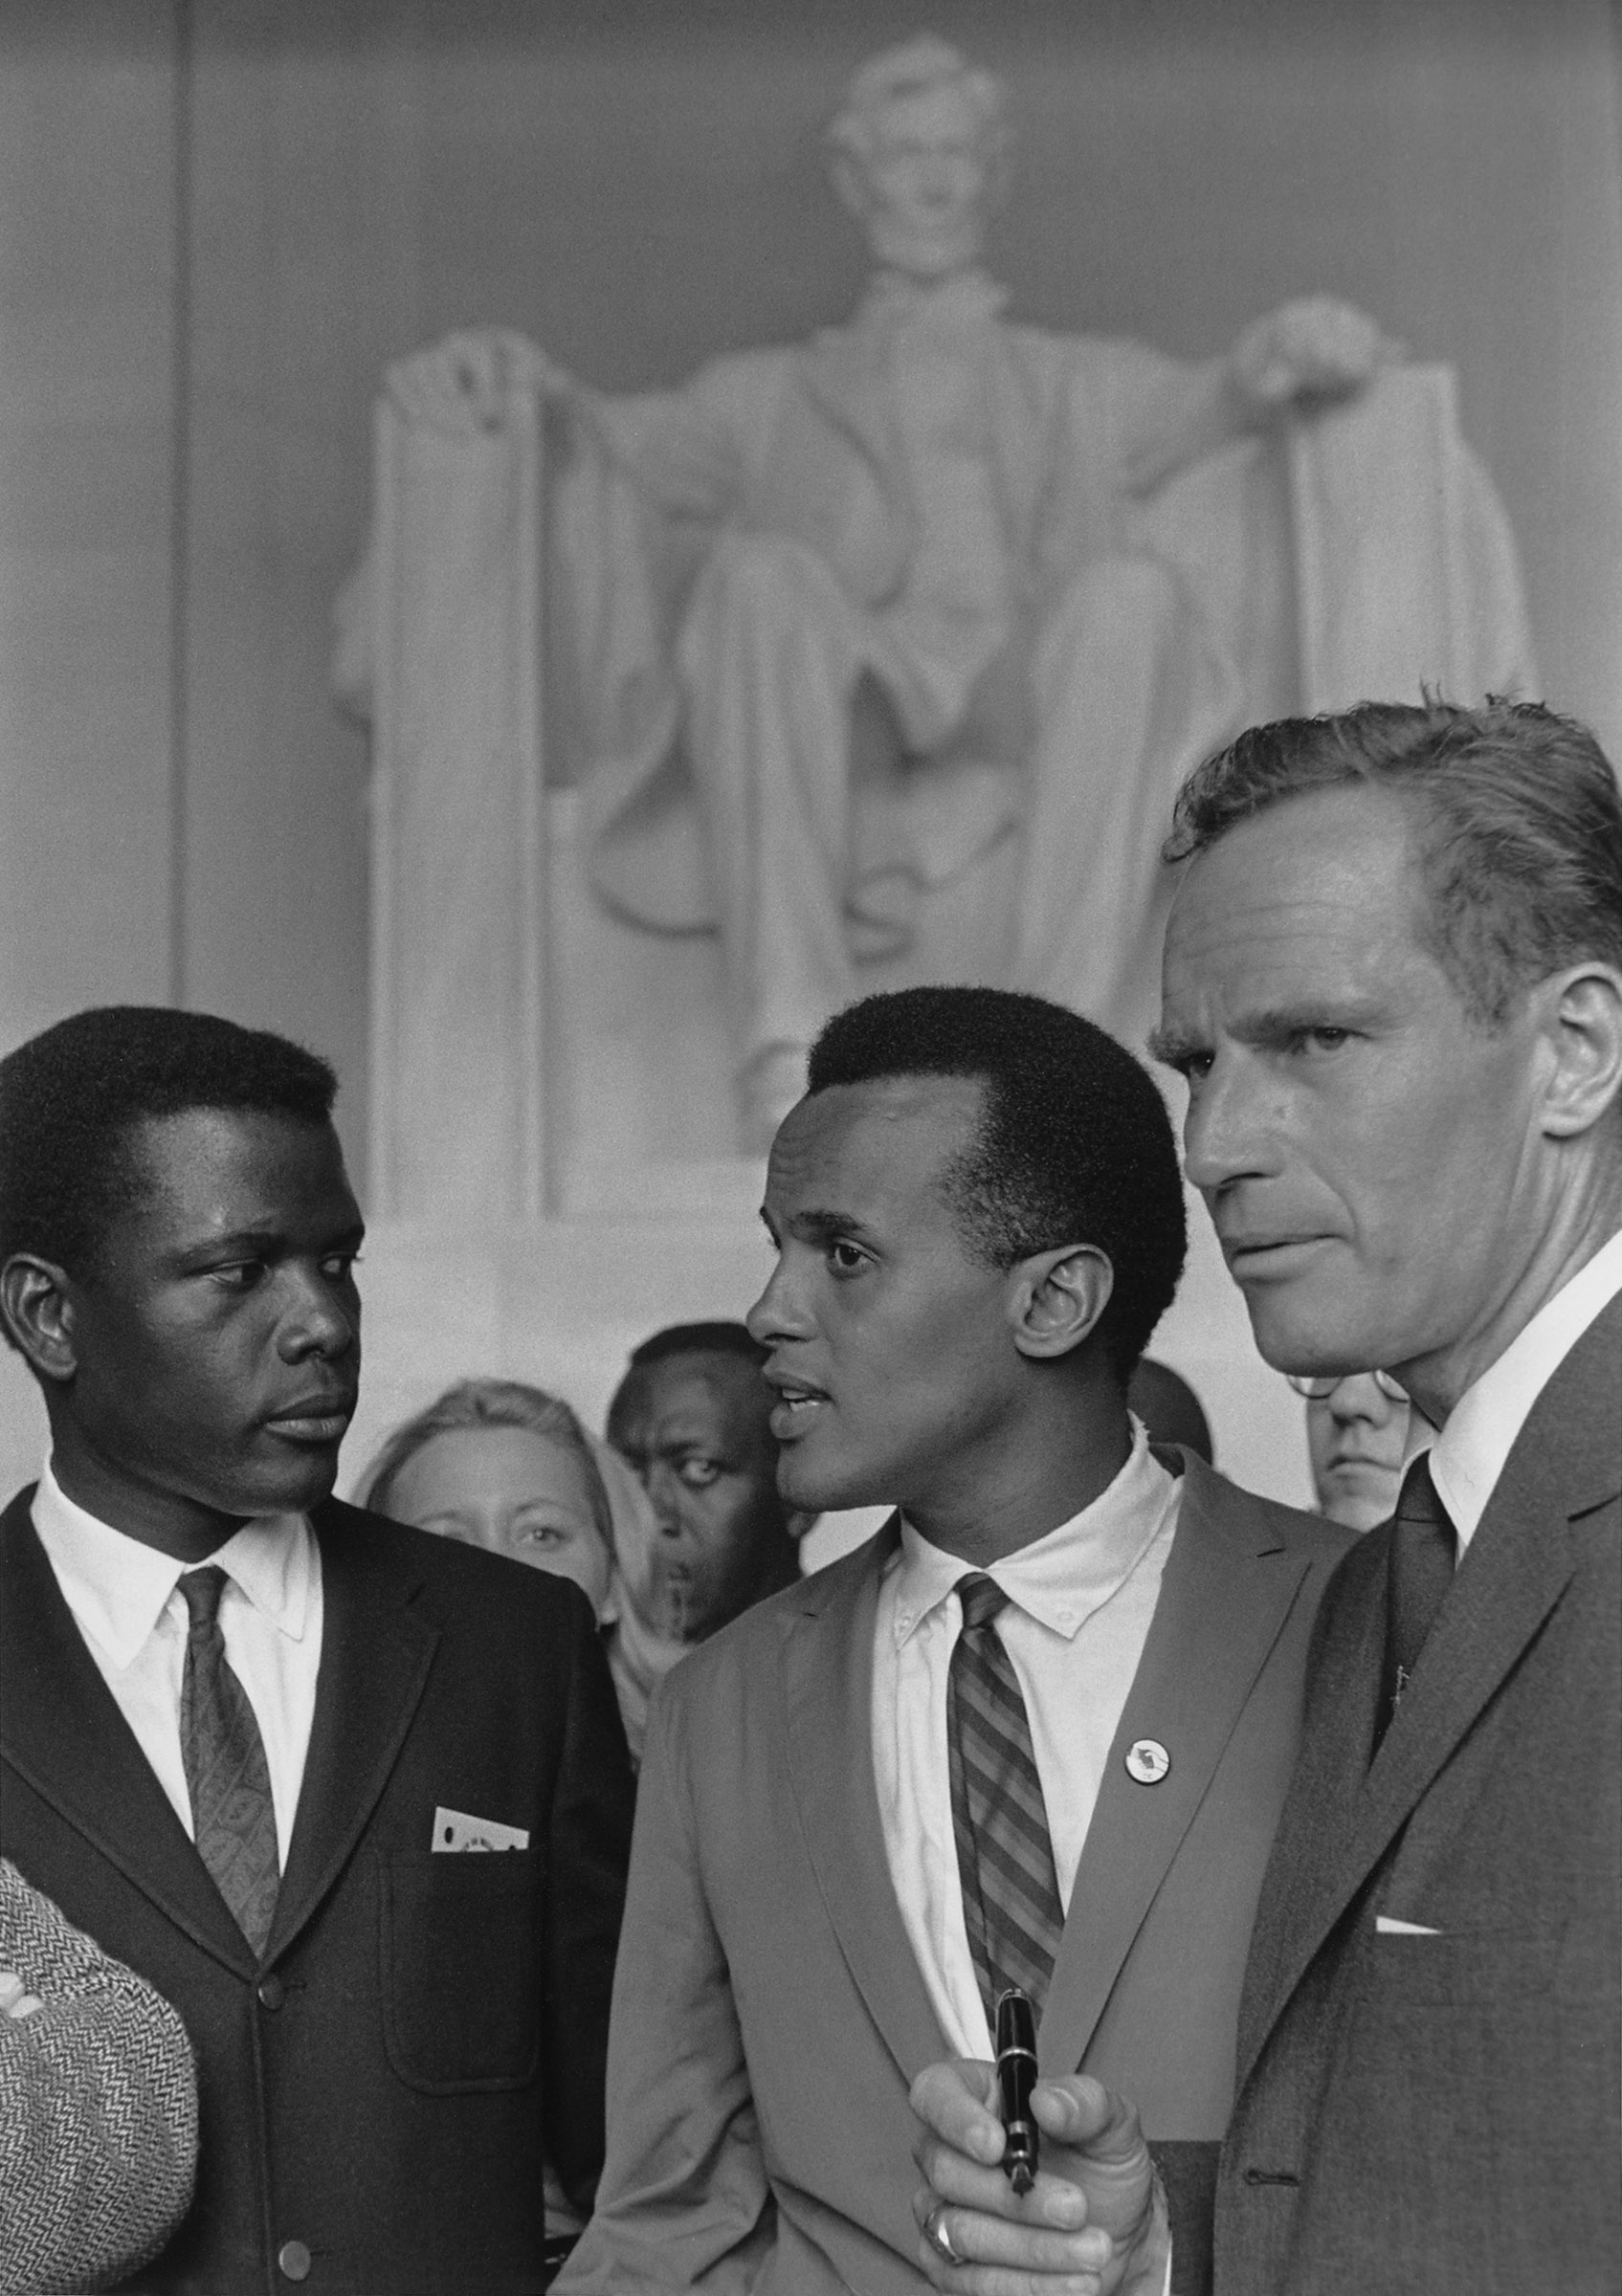 Actors Sidney Poitier, Charlton Heston and singer Harry Belafonte at the 1963 Civil Rights March on